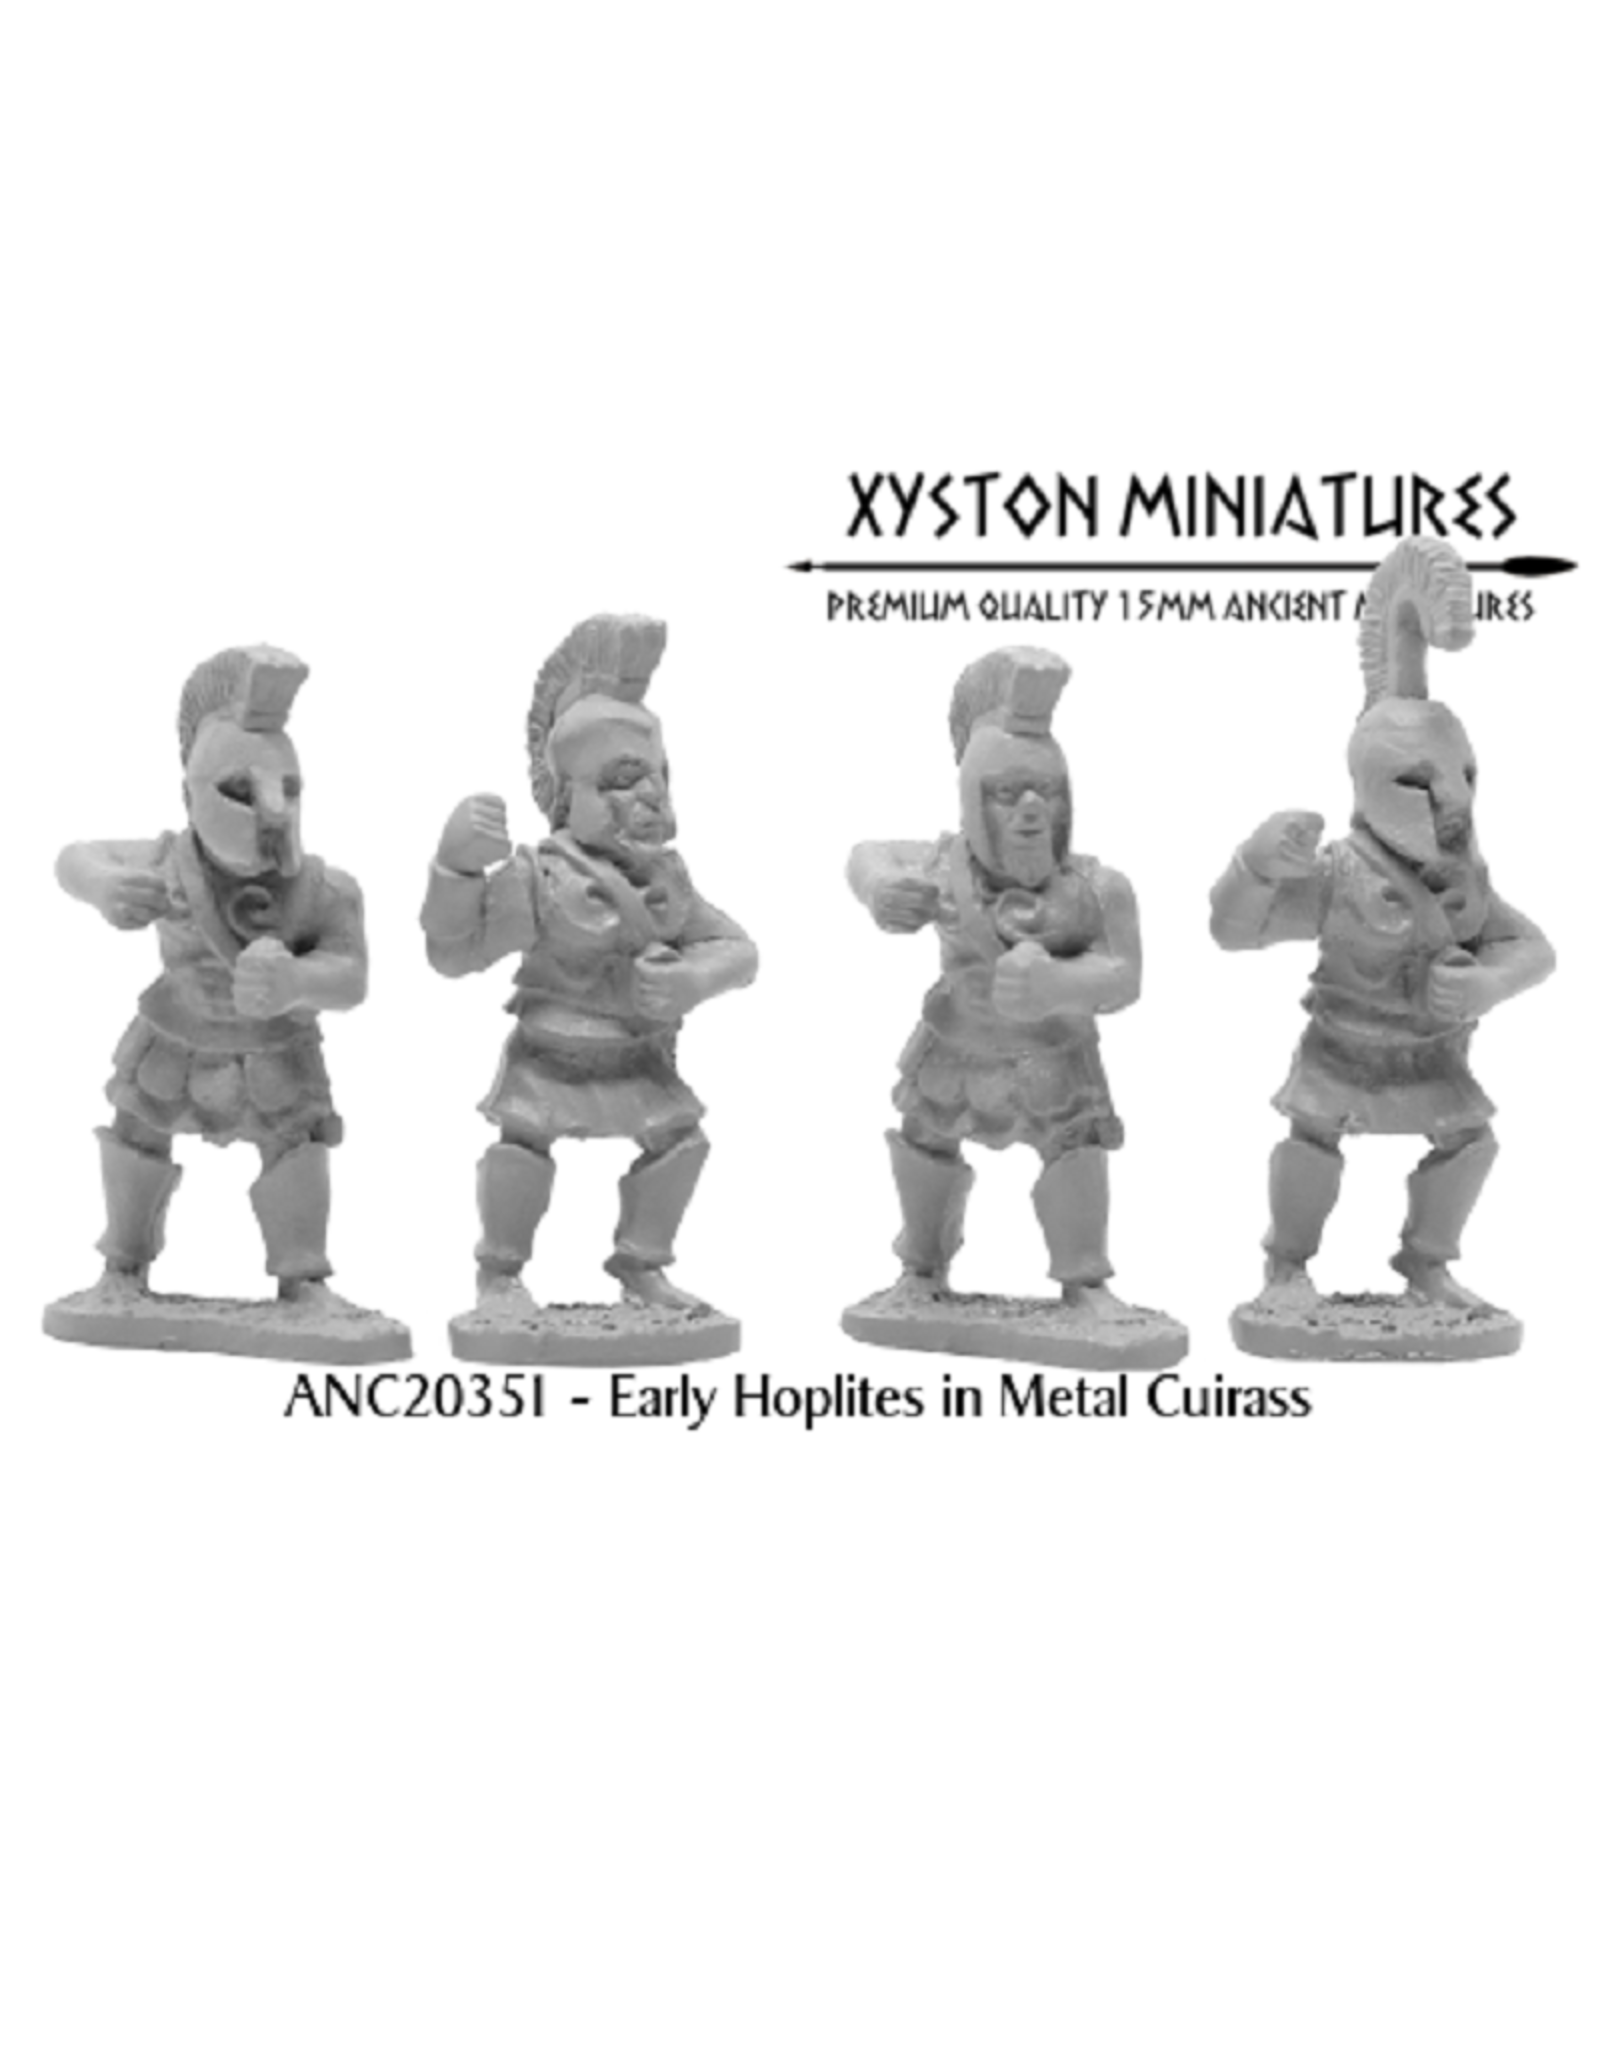 Xyston ANC20351 - Early Hoplites in Metal Cuirass